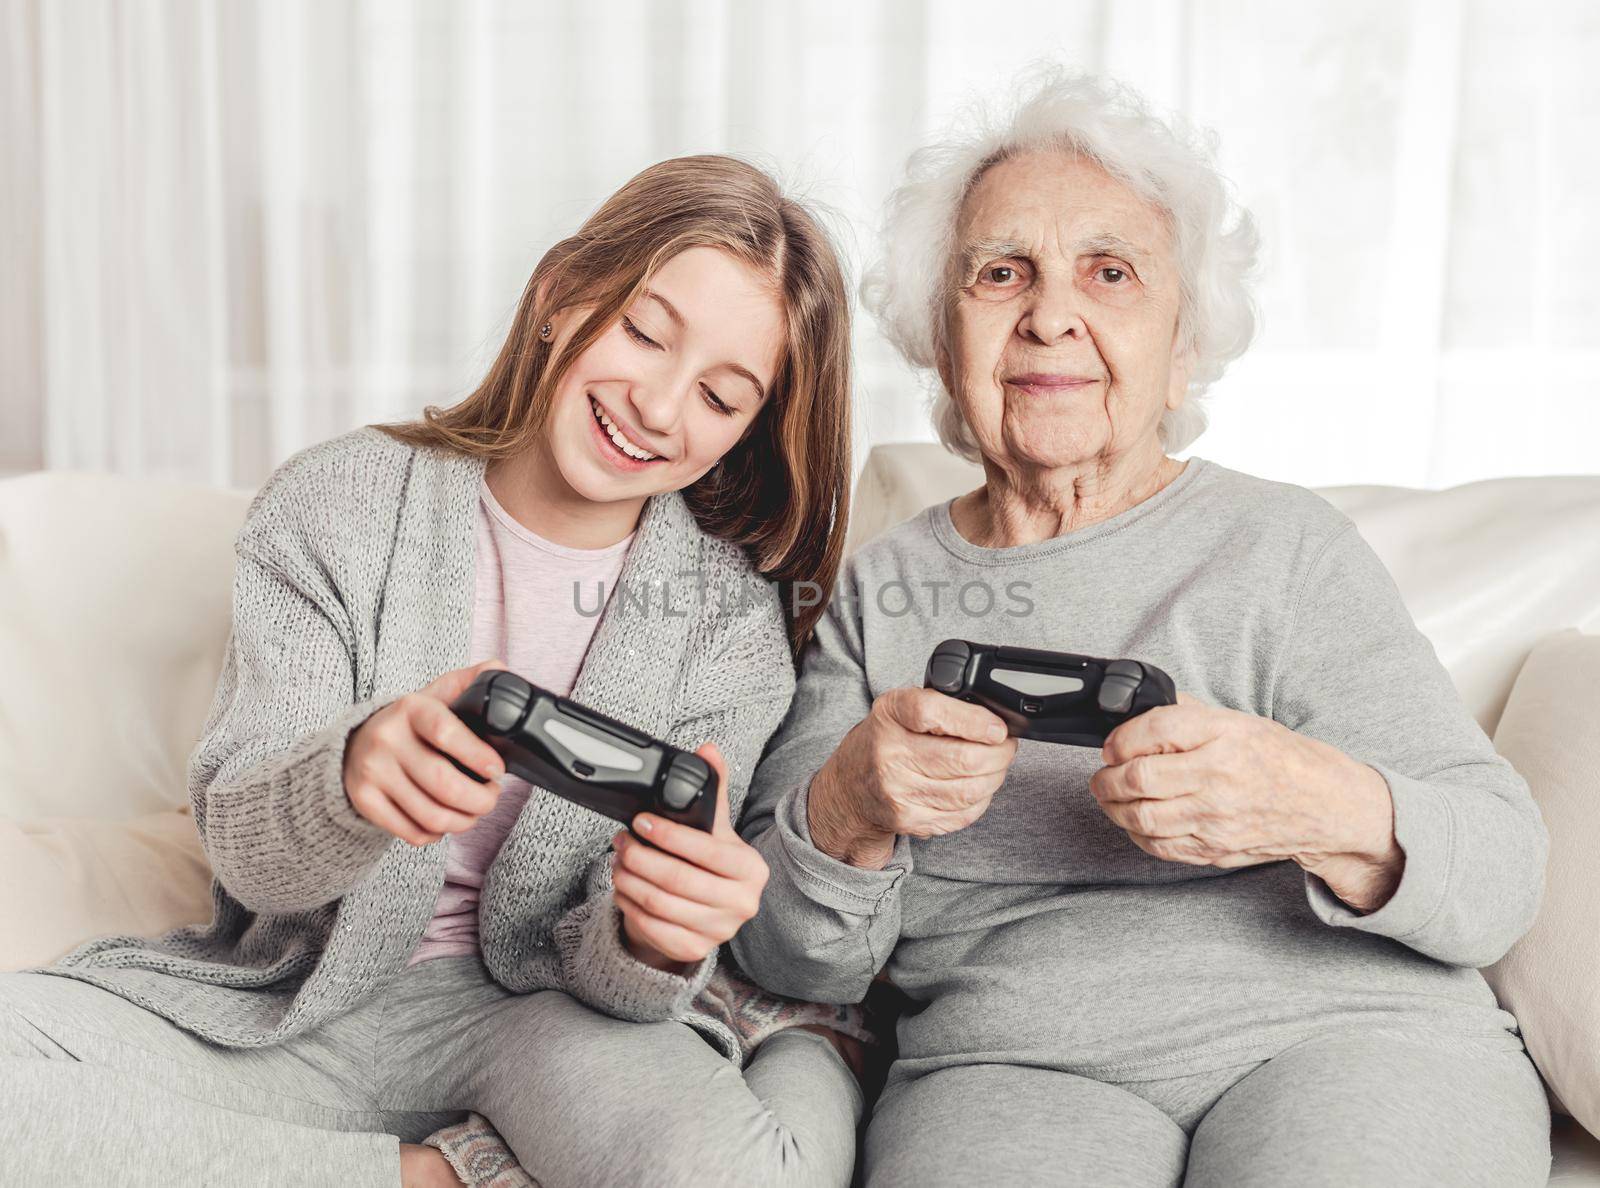 Grandmother with granddaughter playing games by tan4ikk1